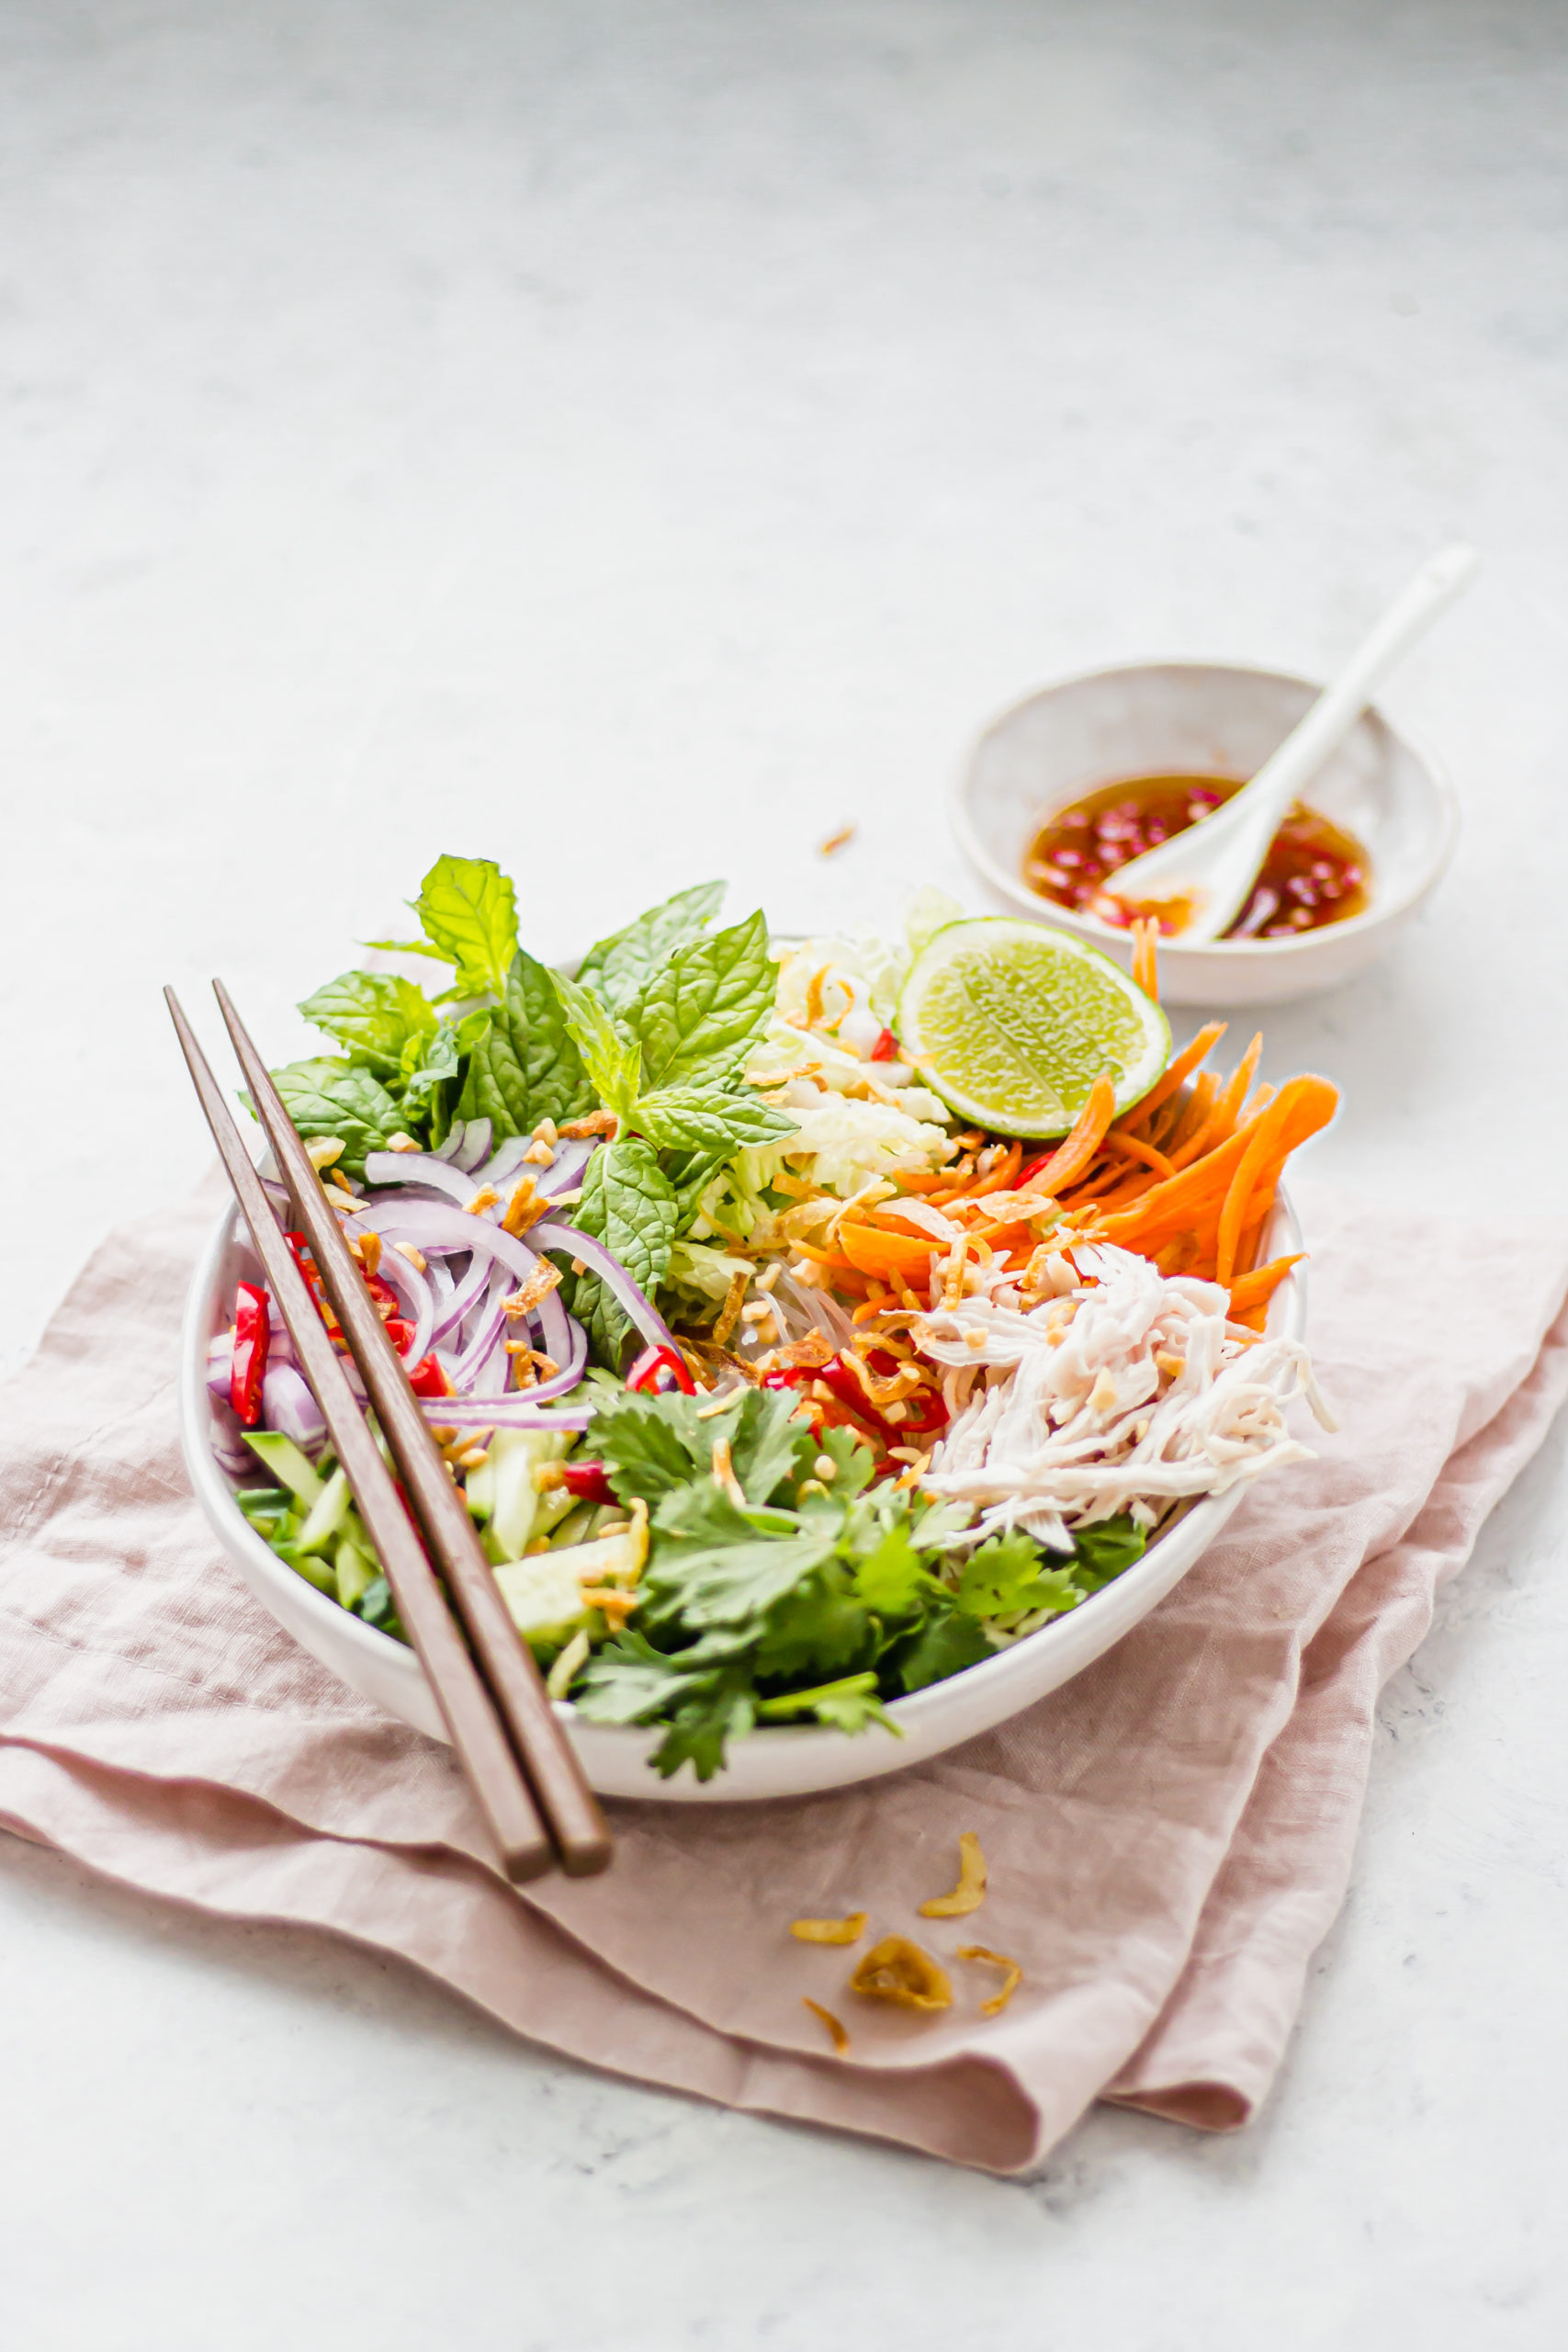 Vietnamese salad with a side of dressing